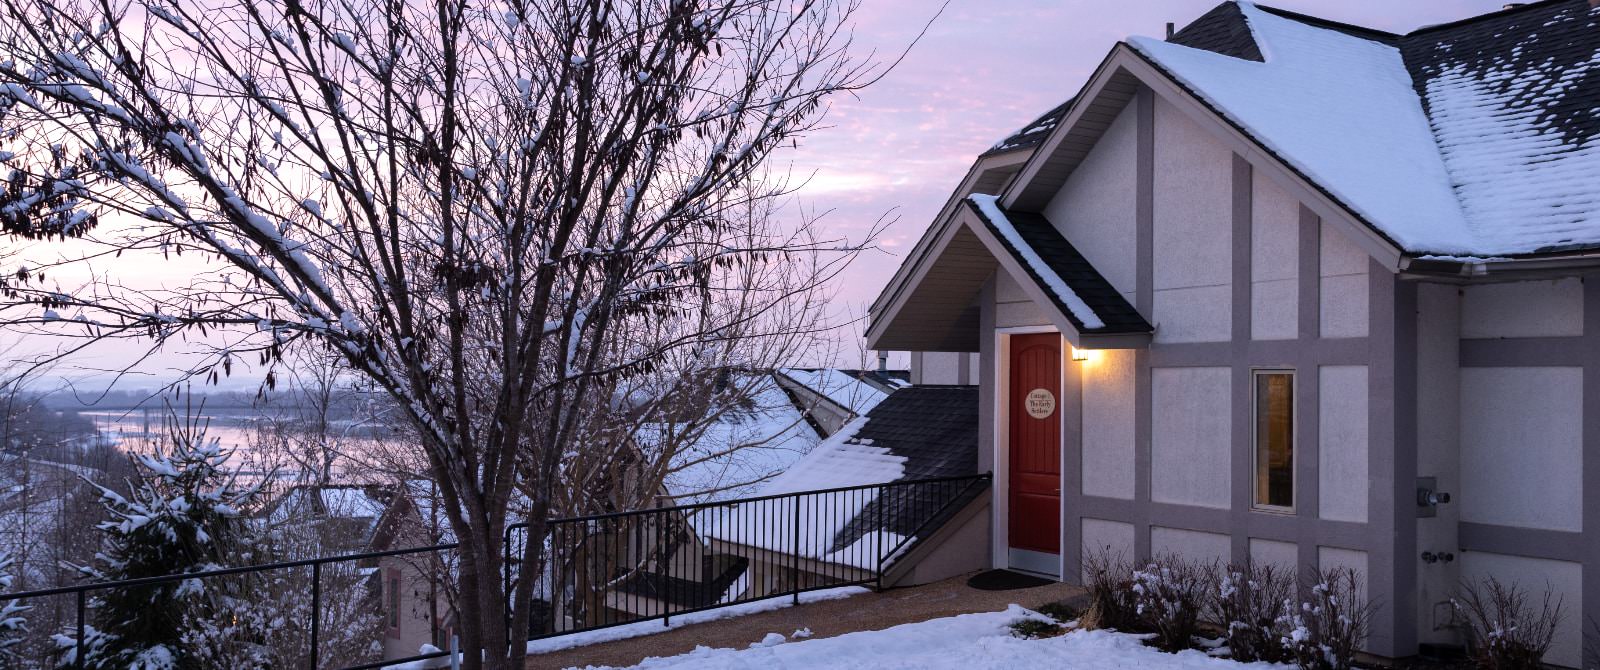 Exterior view of one of the cottages with pathway leading up to red door covered by snow at dusk